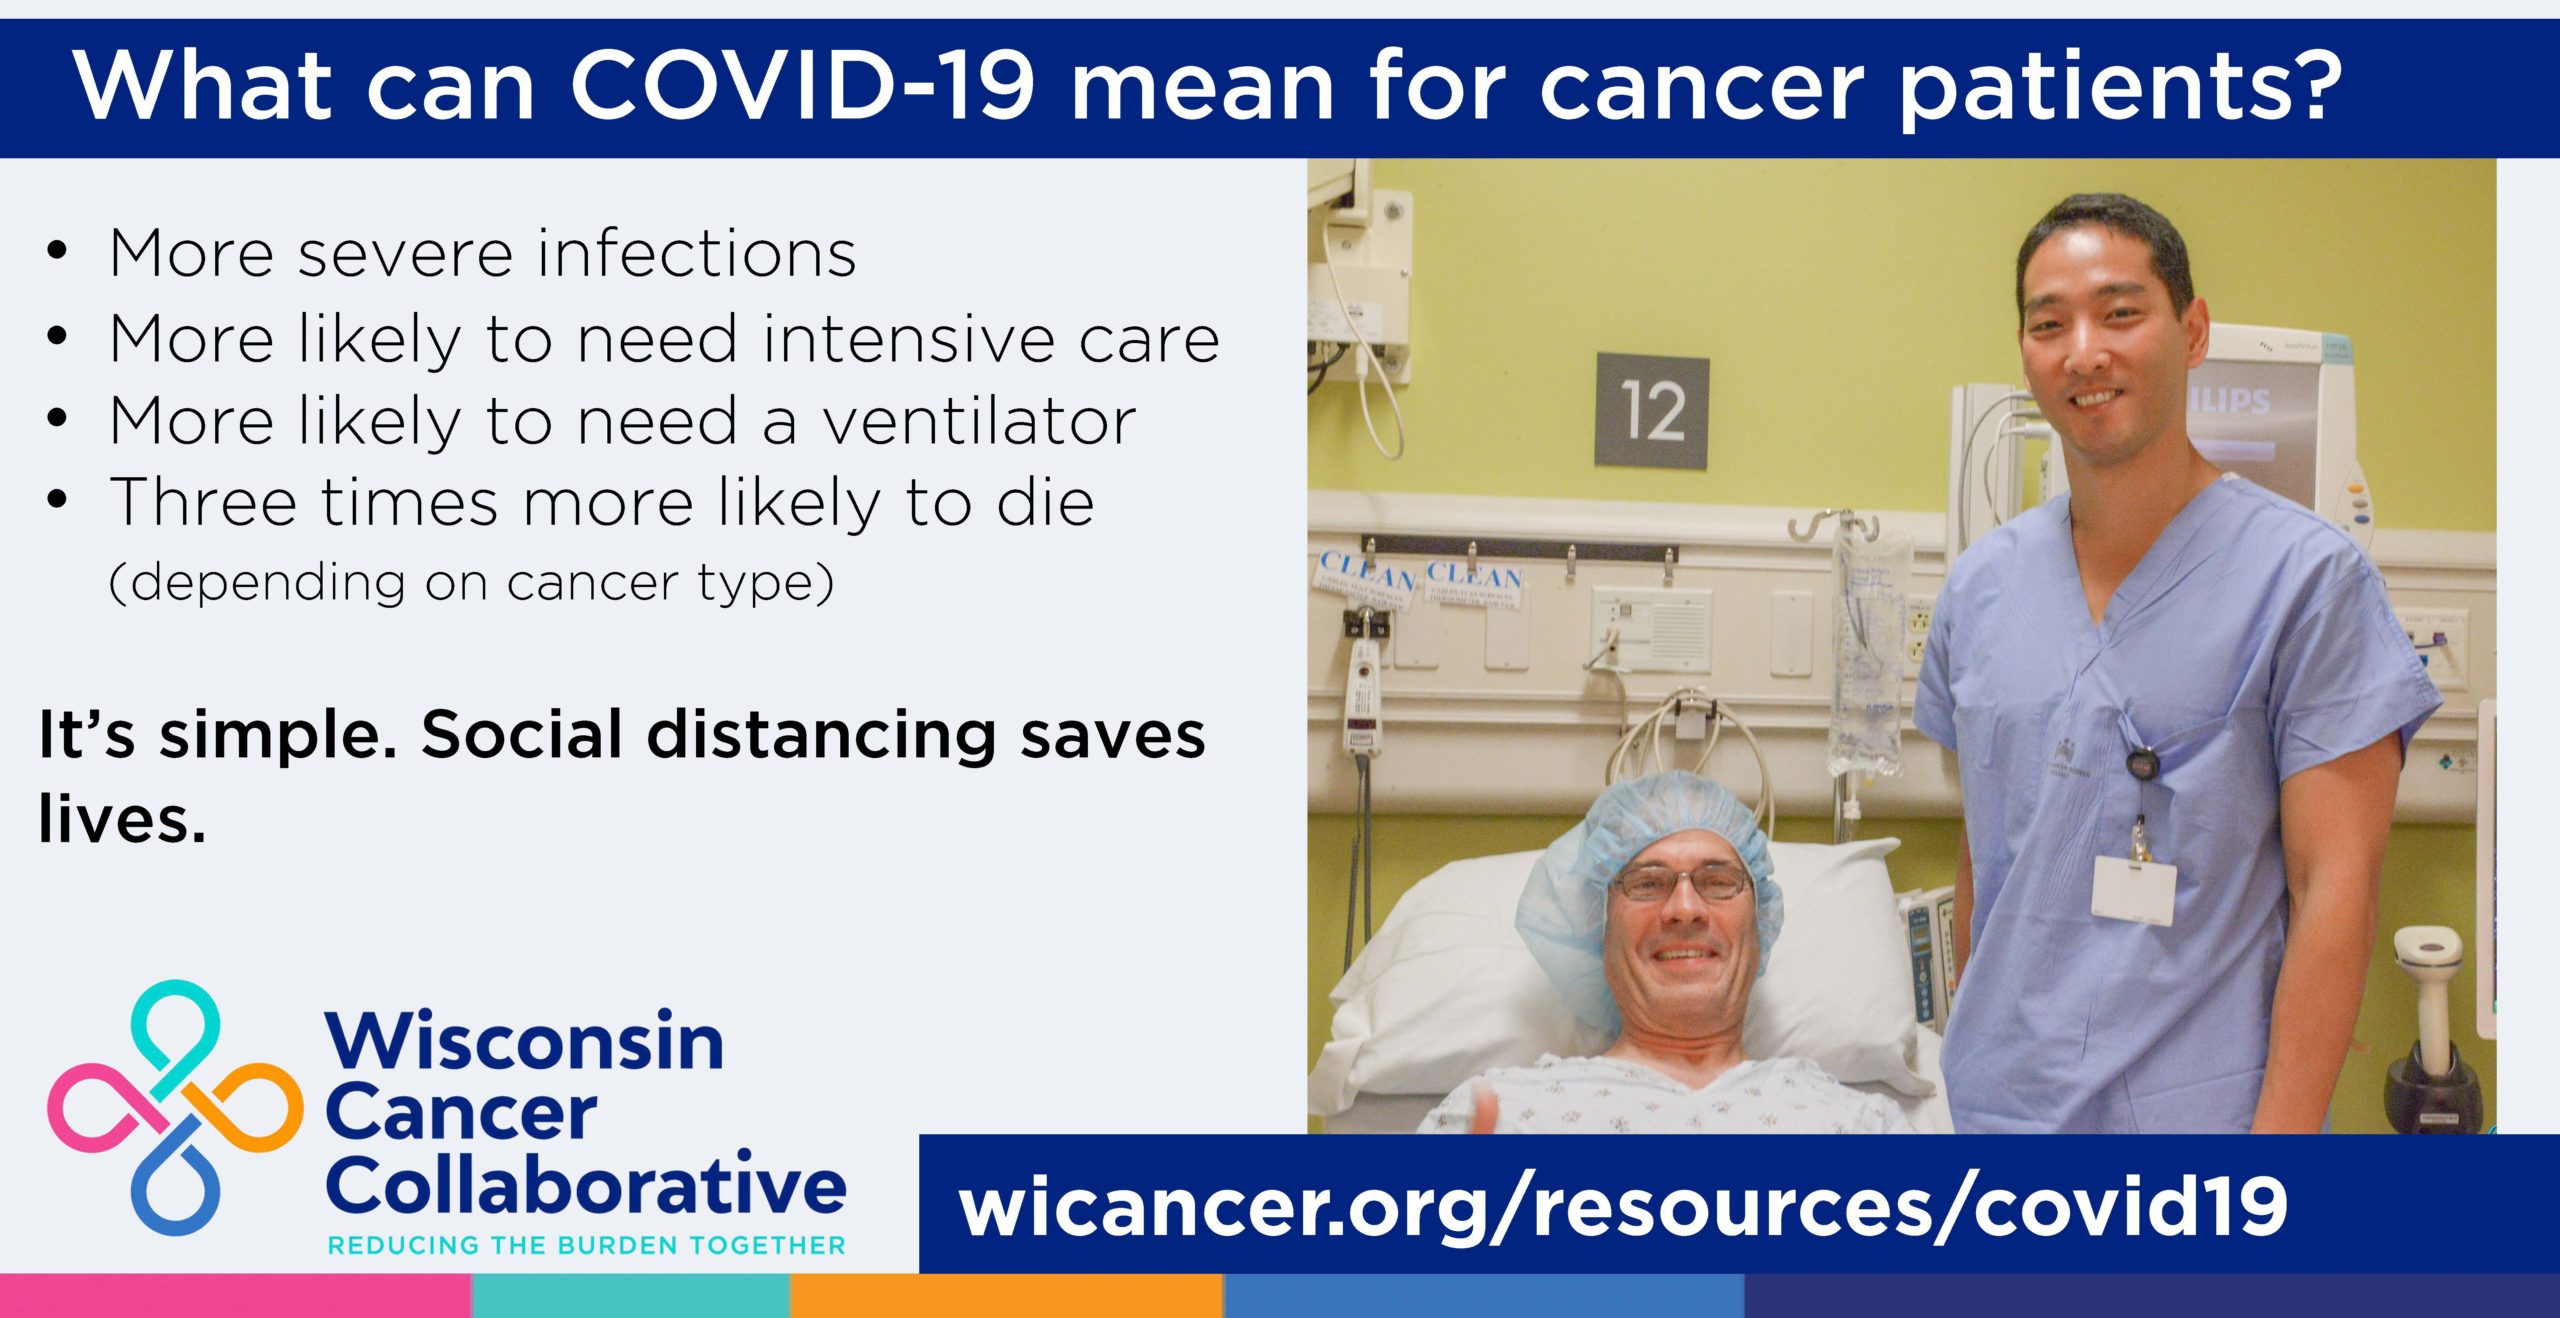 What can COVID mean for cancer patients